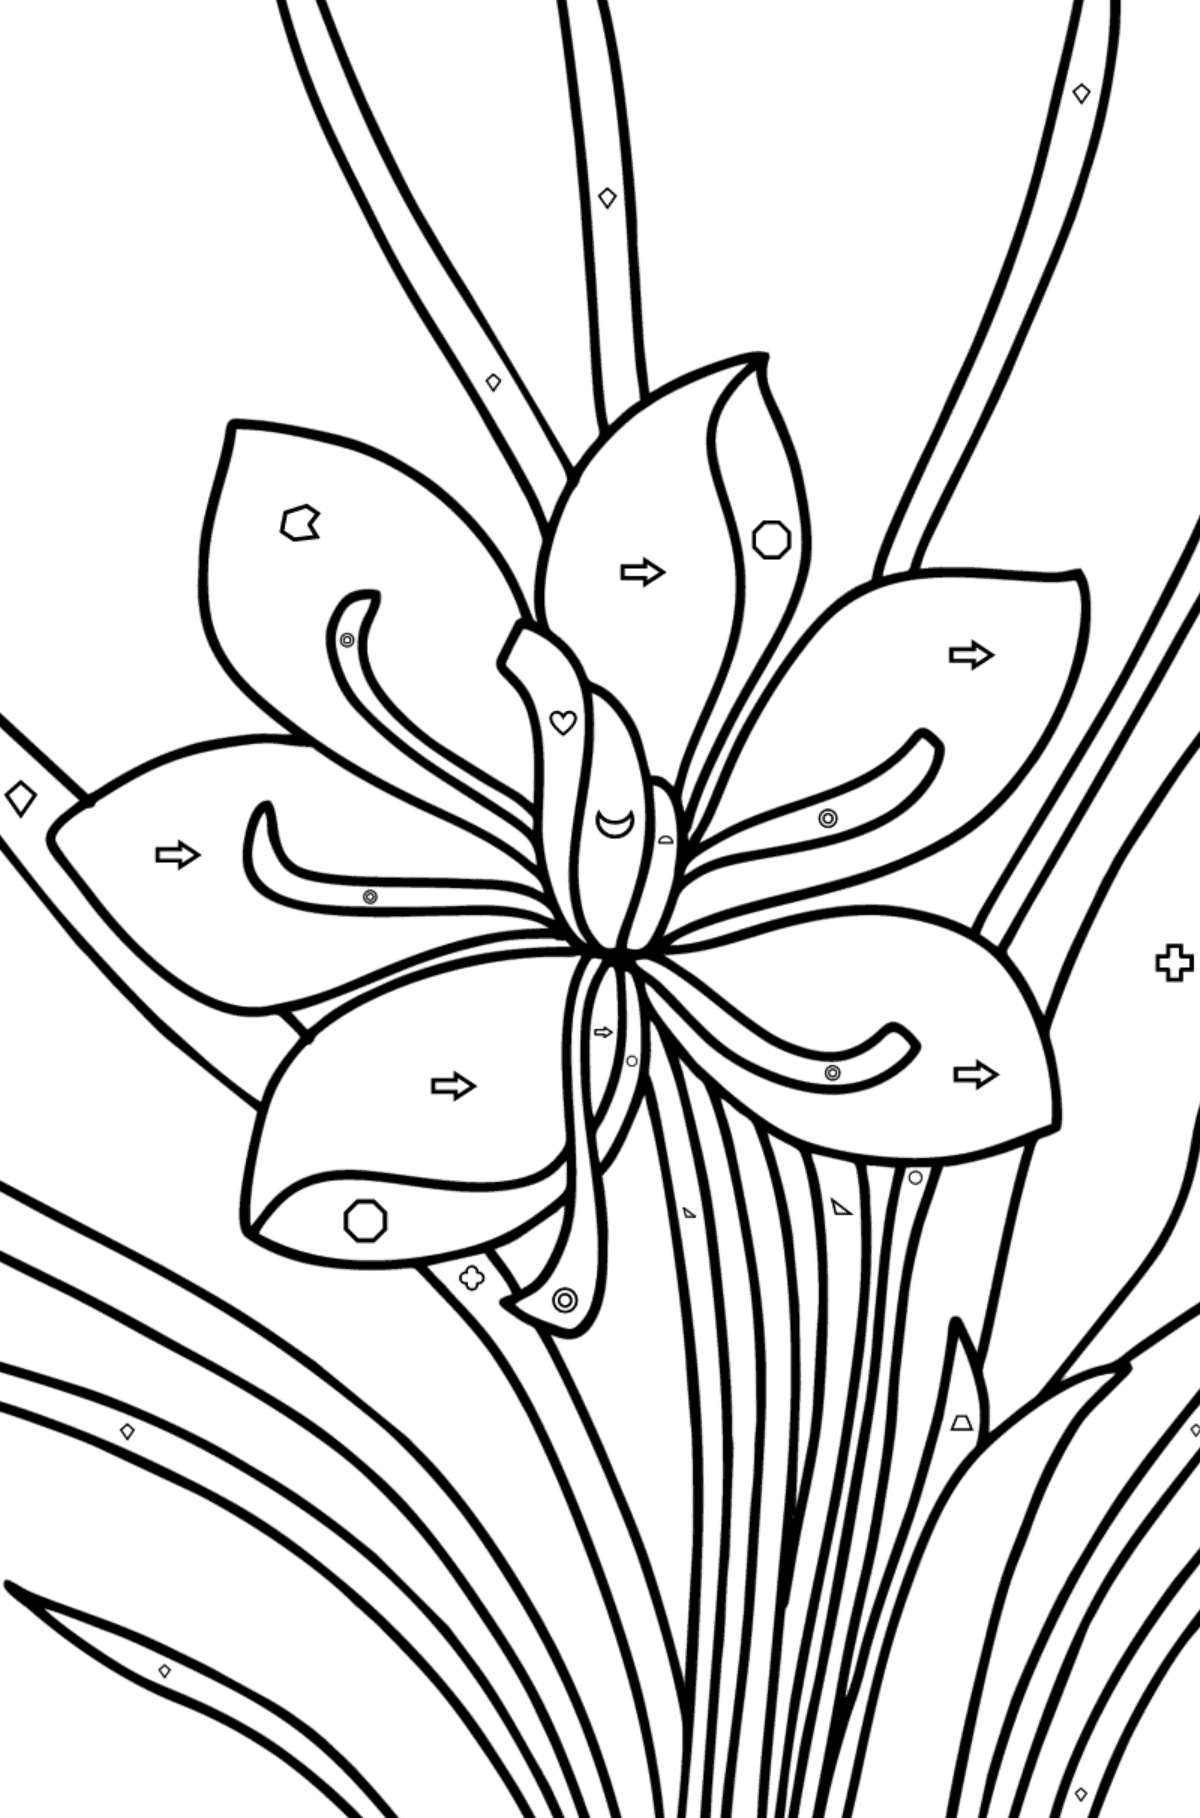 Crocus coloring page - Coloring by Geometric Shapes for Kids